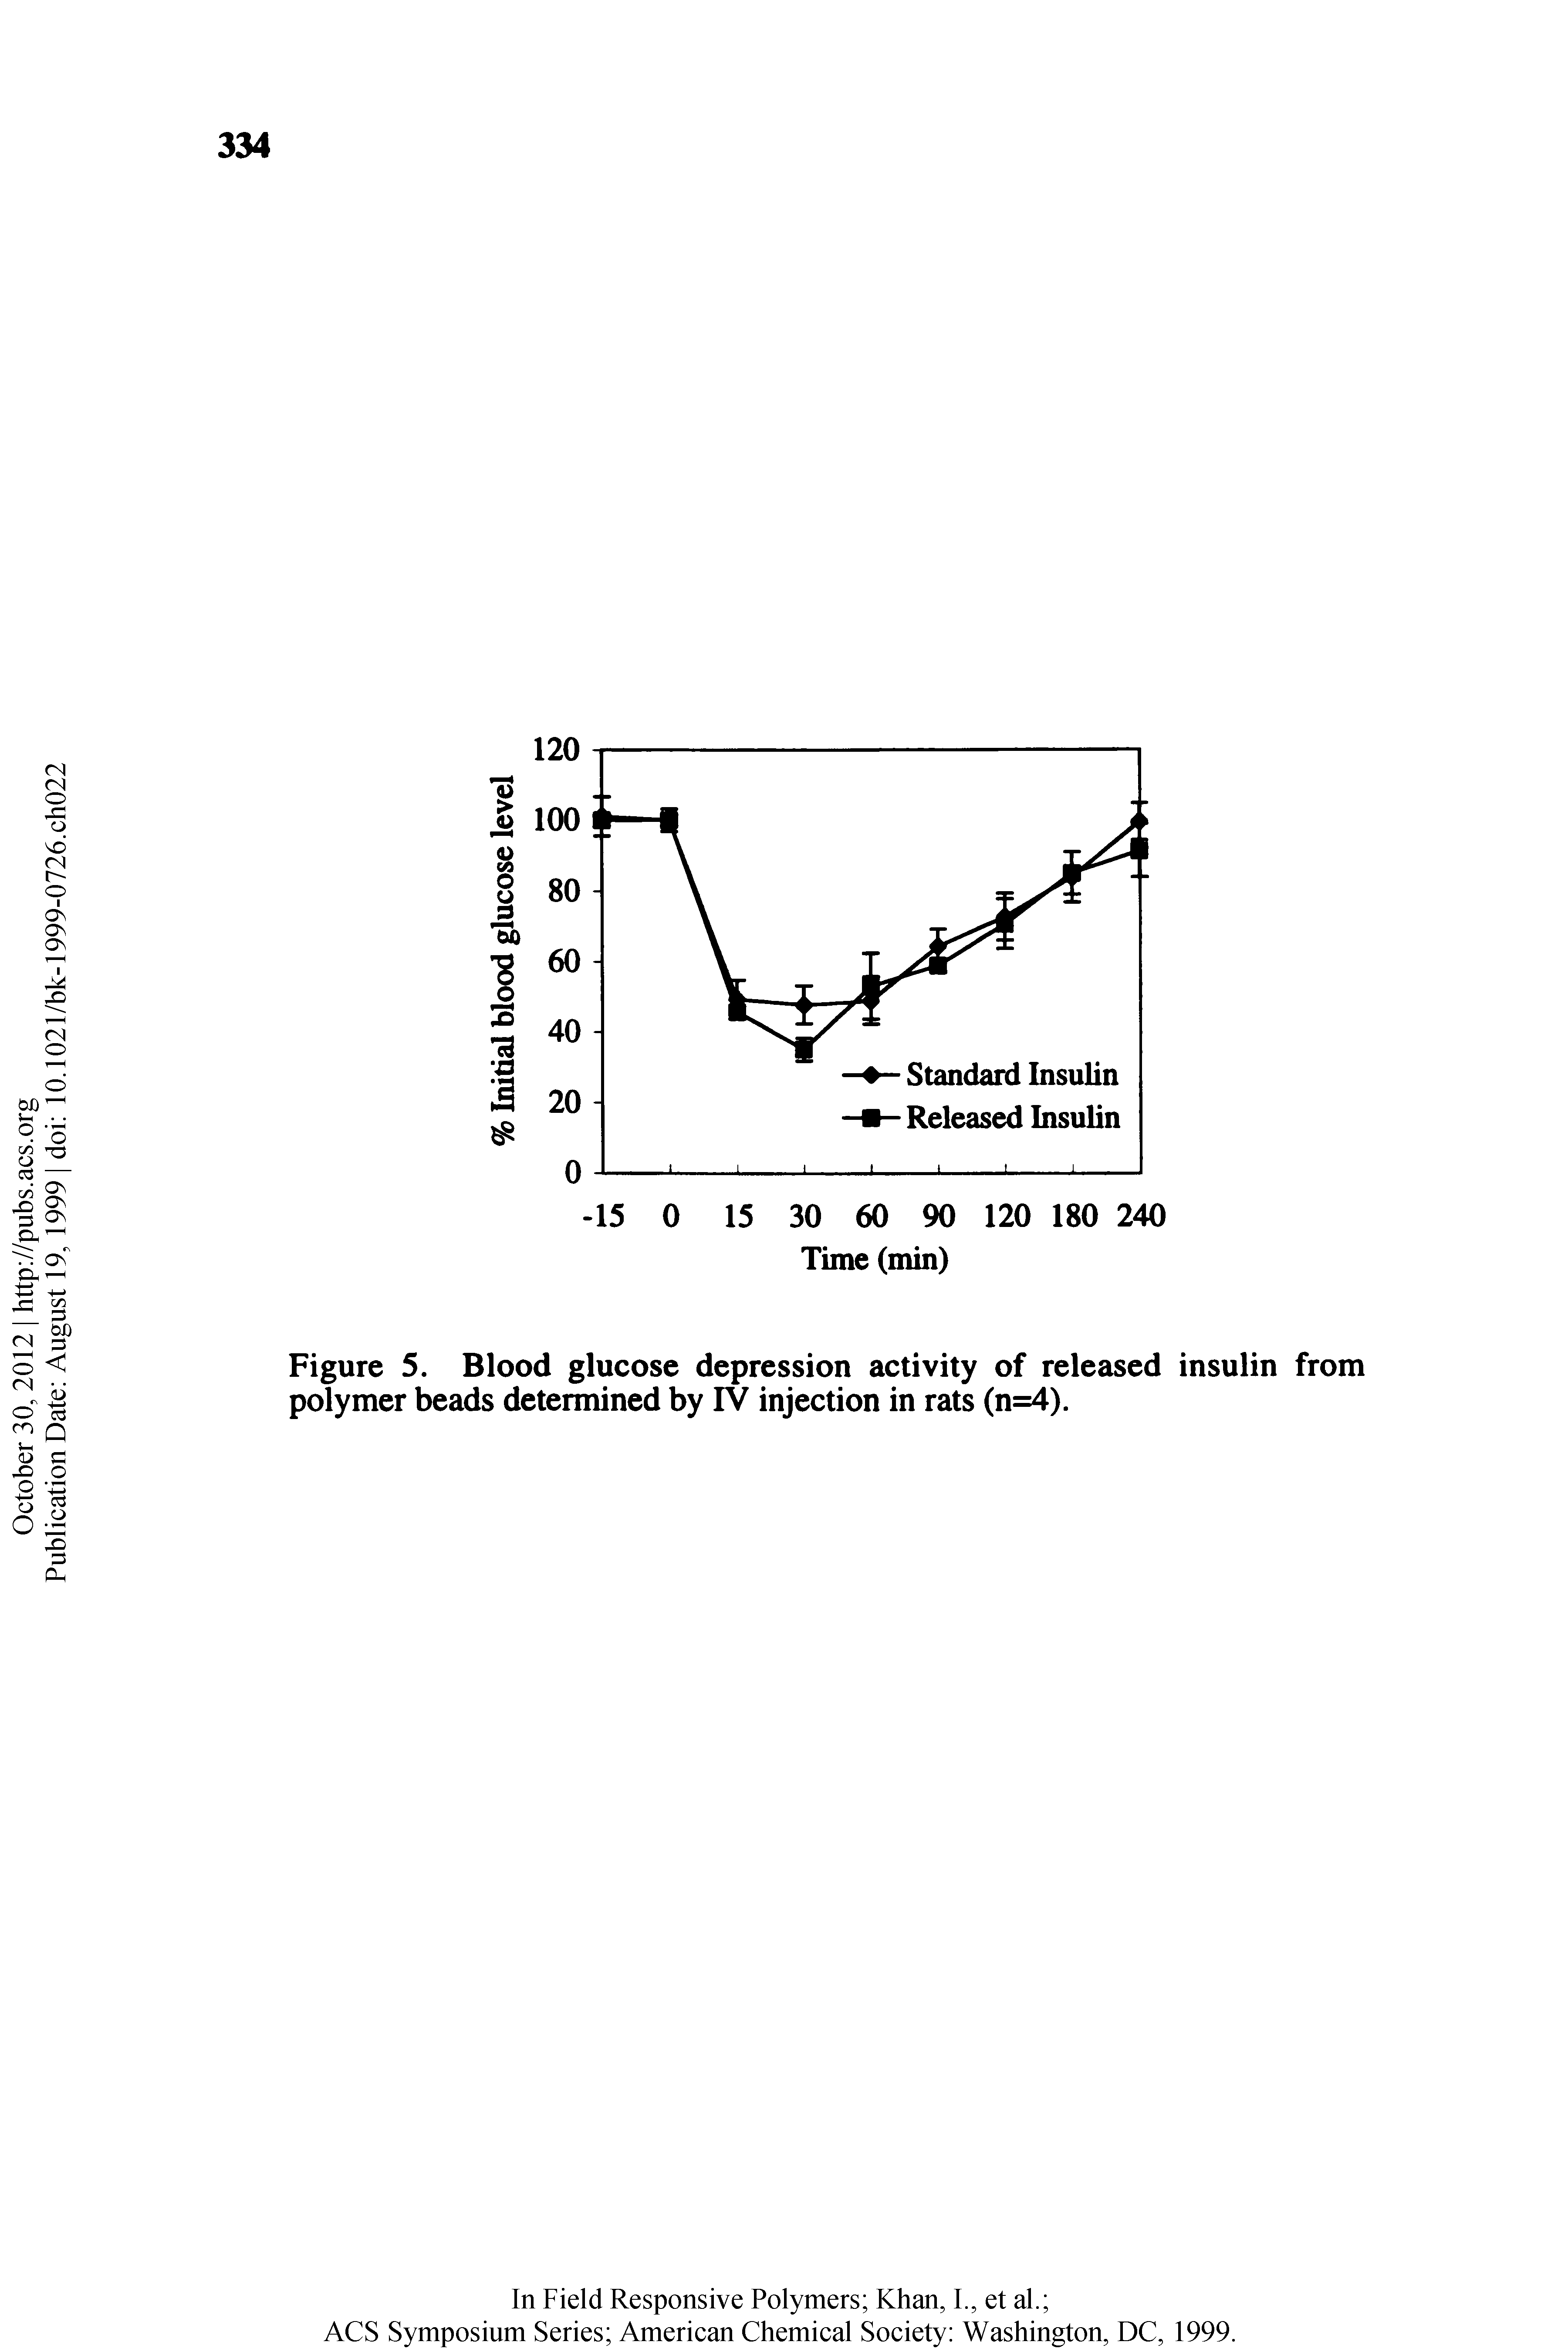 Figure 5. Blood glucose depression activity of released insulin from polymer beads determined by TV injection in rats (n=4).